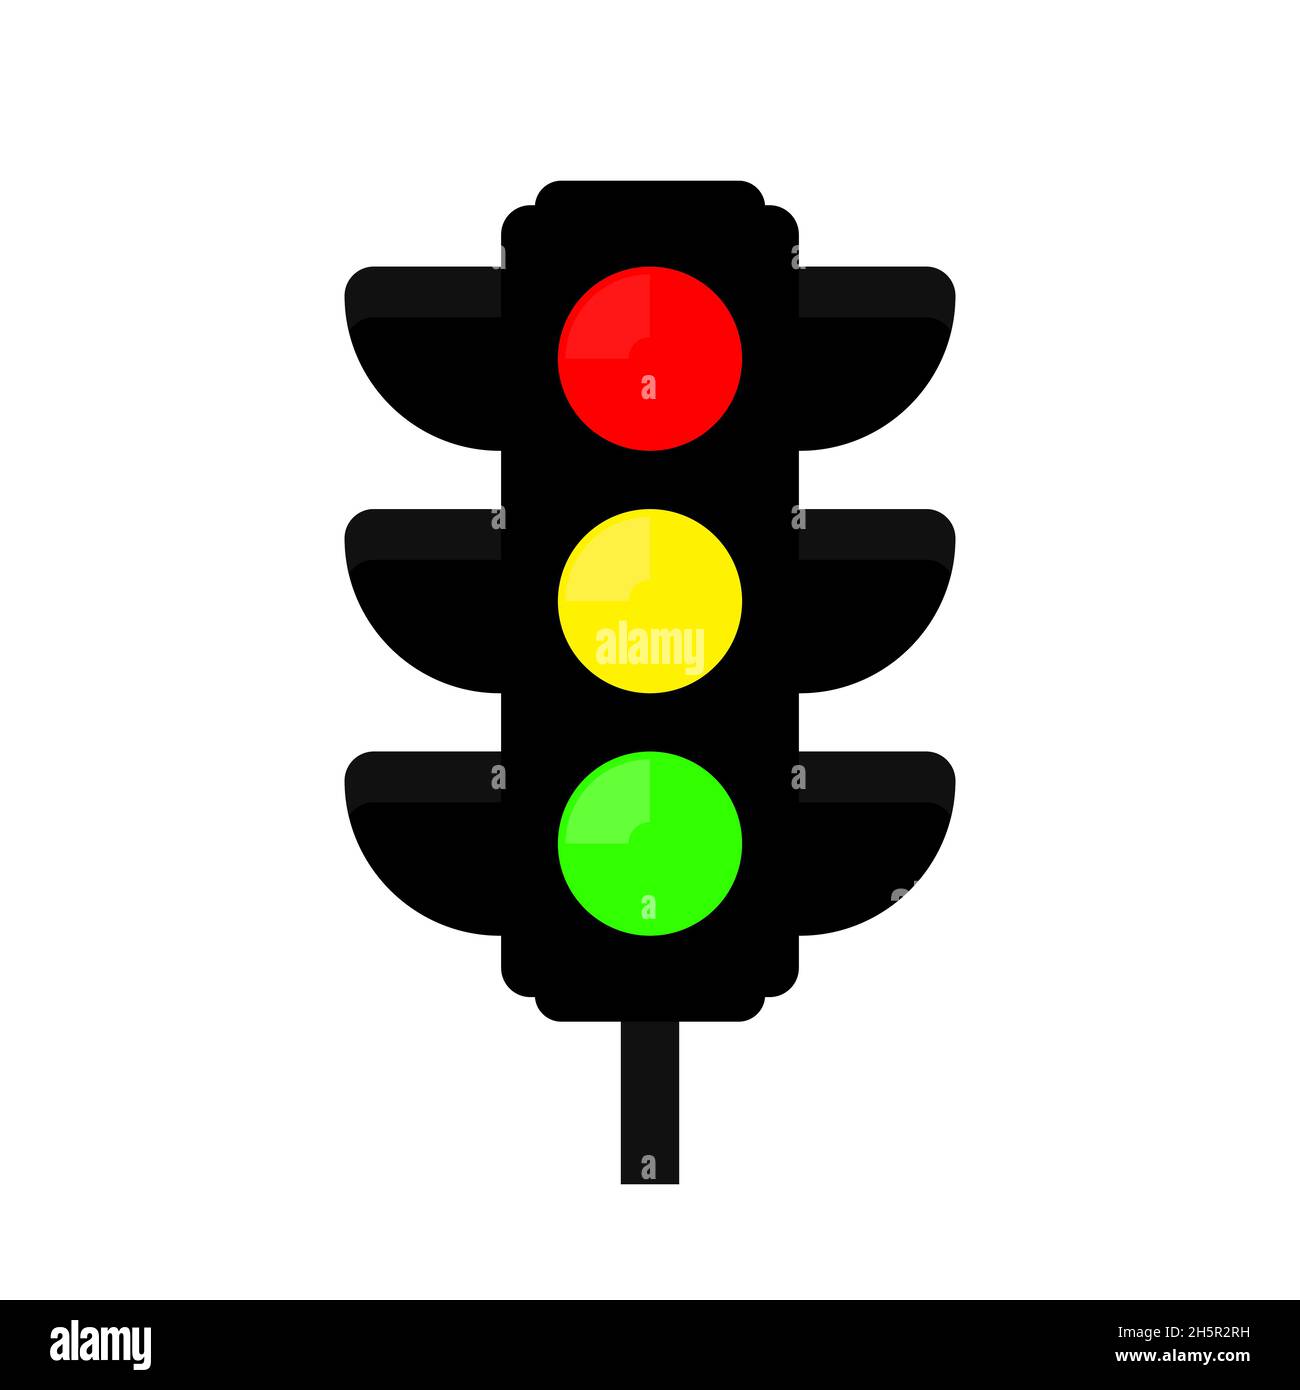 Traffic lights vector transportation light semaphore red yellow and green safety signal stoplight isolated illustration Stock Vector